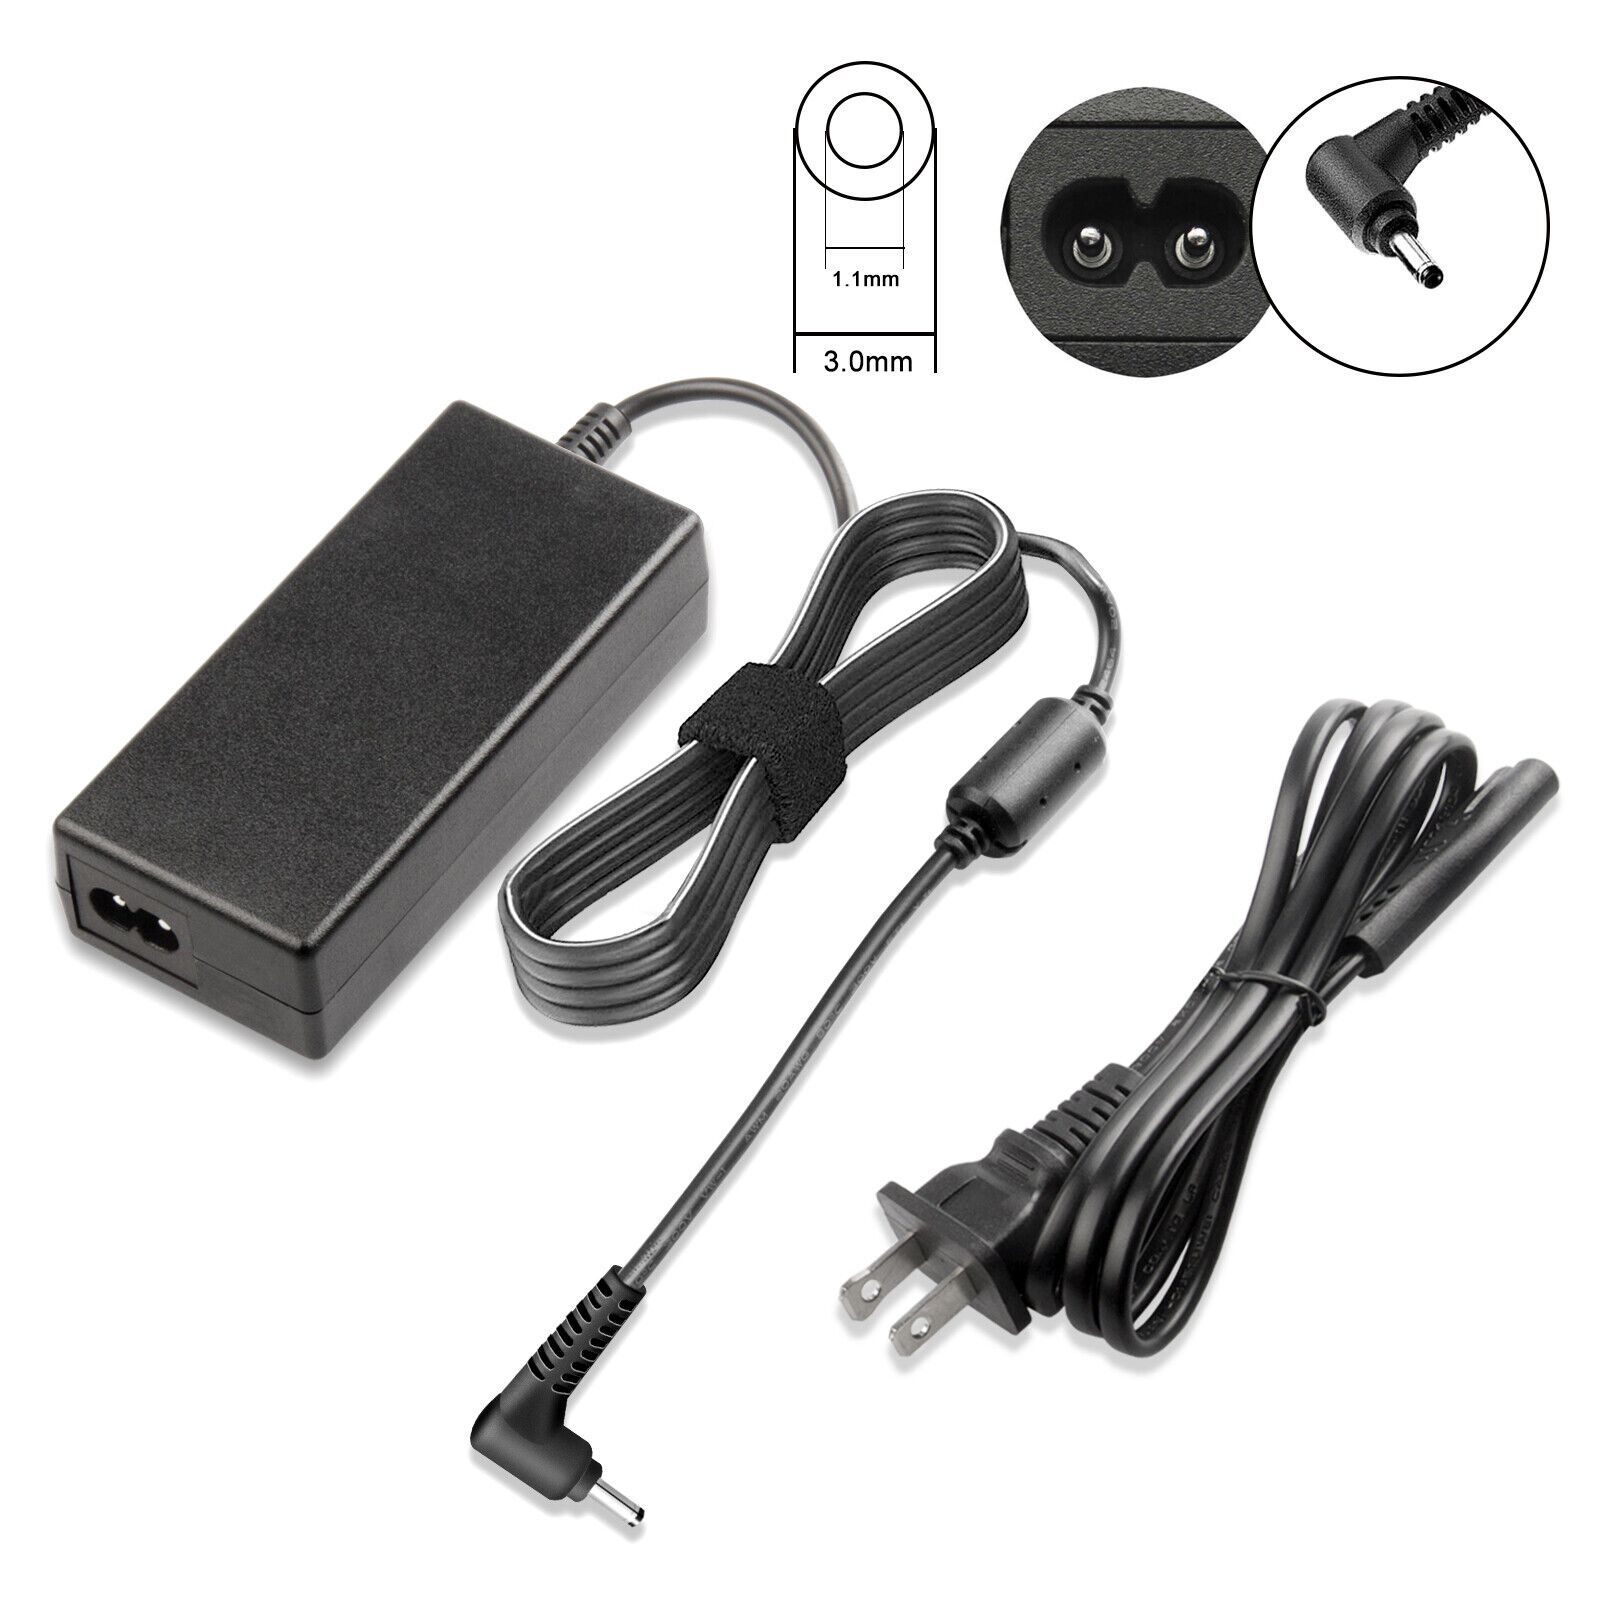 AC Adapter For Acer Aspire One Chromebook C720, Iconia W700 Charger & Plug Power